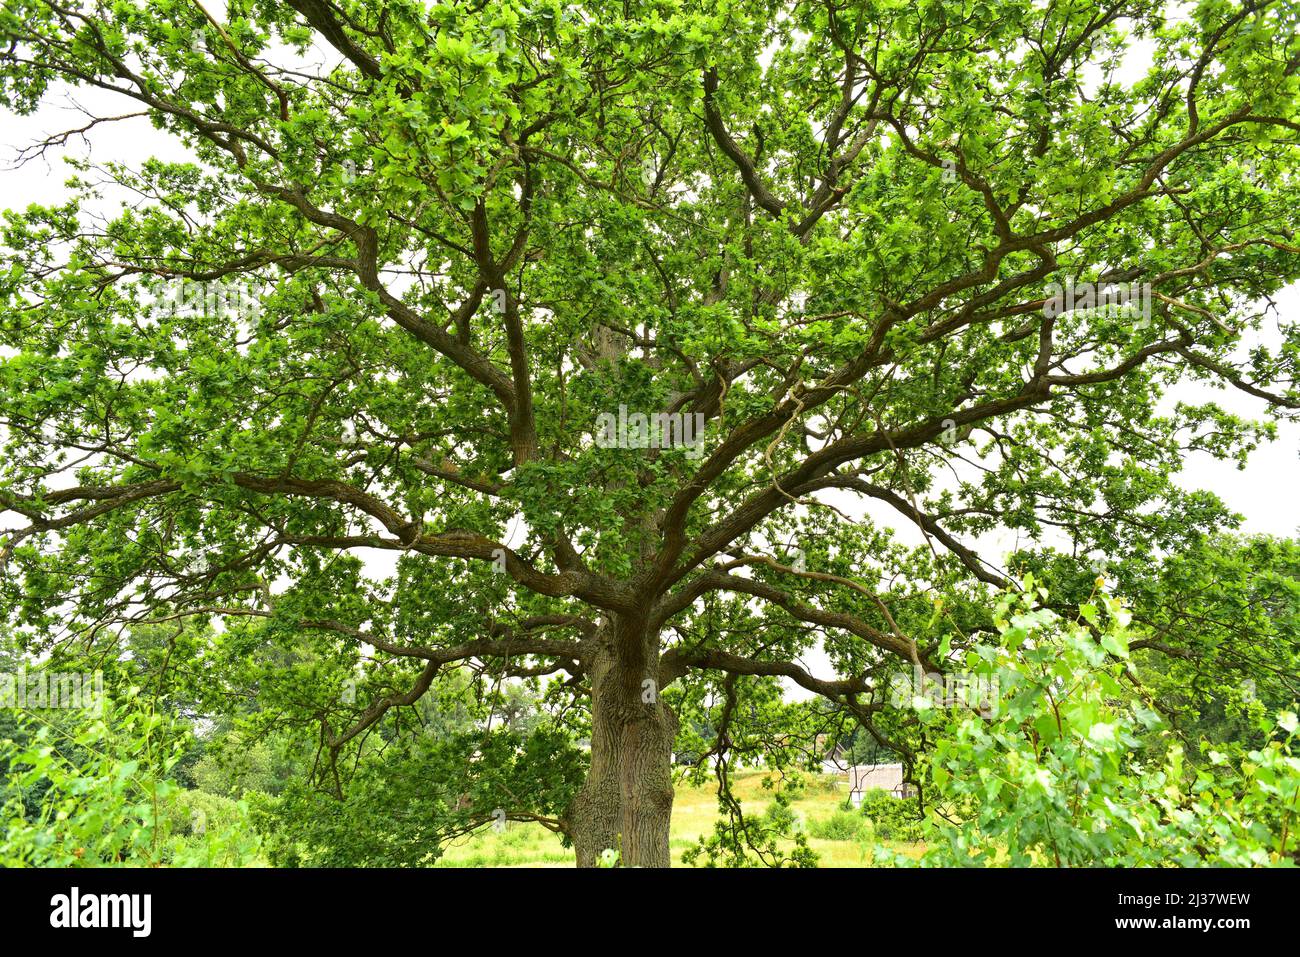 Common oak or European oak (Quercus robur) is a deciduous tree native to central Europe and southern Europe mountains, Caucasus and Turkey. This Stock Photo